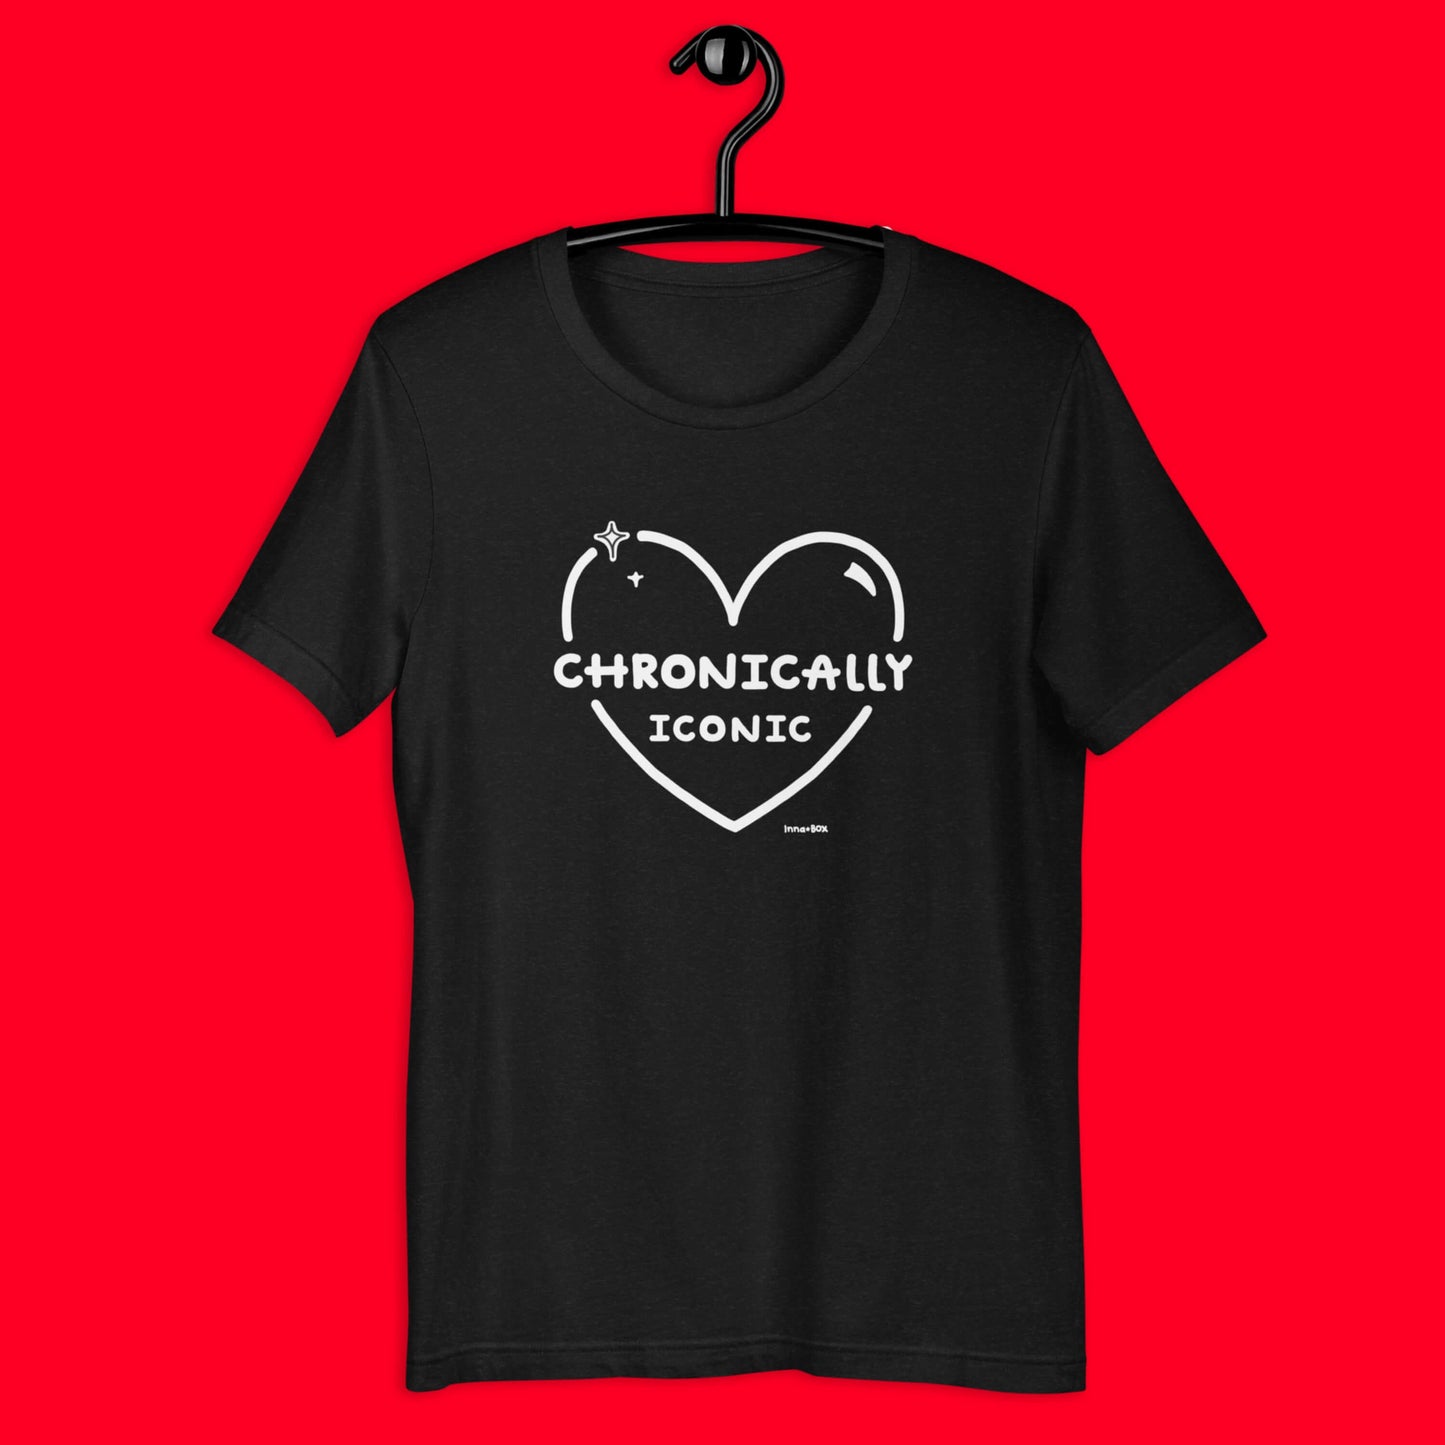 The Chronically Iconic black tee hanging up on a black hanger over a red background. The short sleeve t-shirt features a white heart outline with sparkles and centre text reading 'chronically iconic' with the innabox logo underneath. The design is raising awareness for chronic illness and invisible illness.